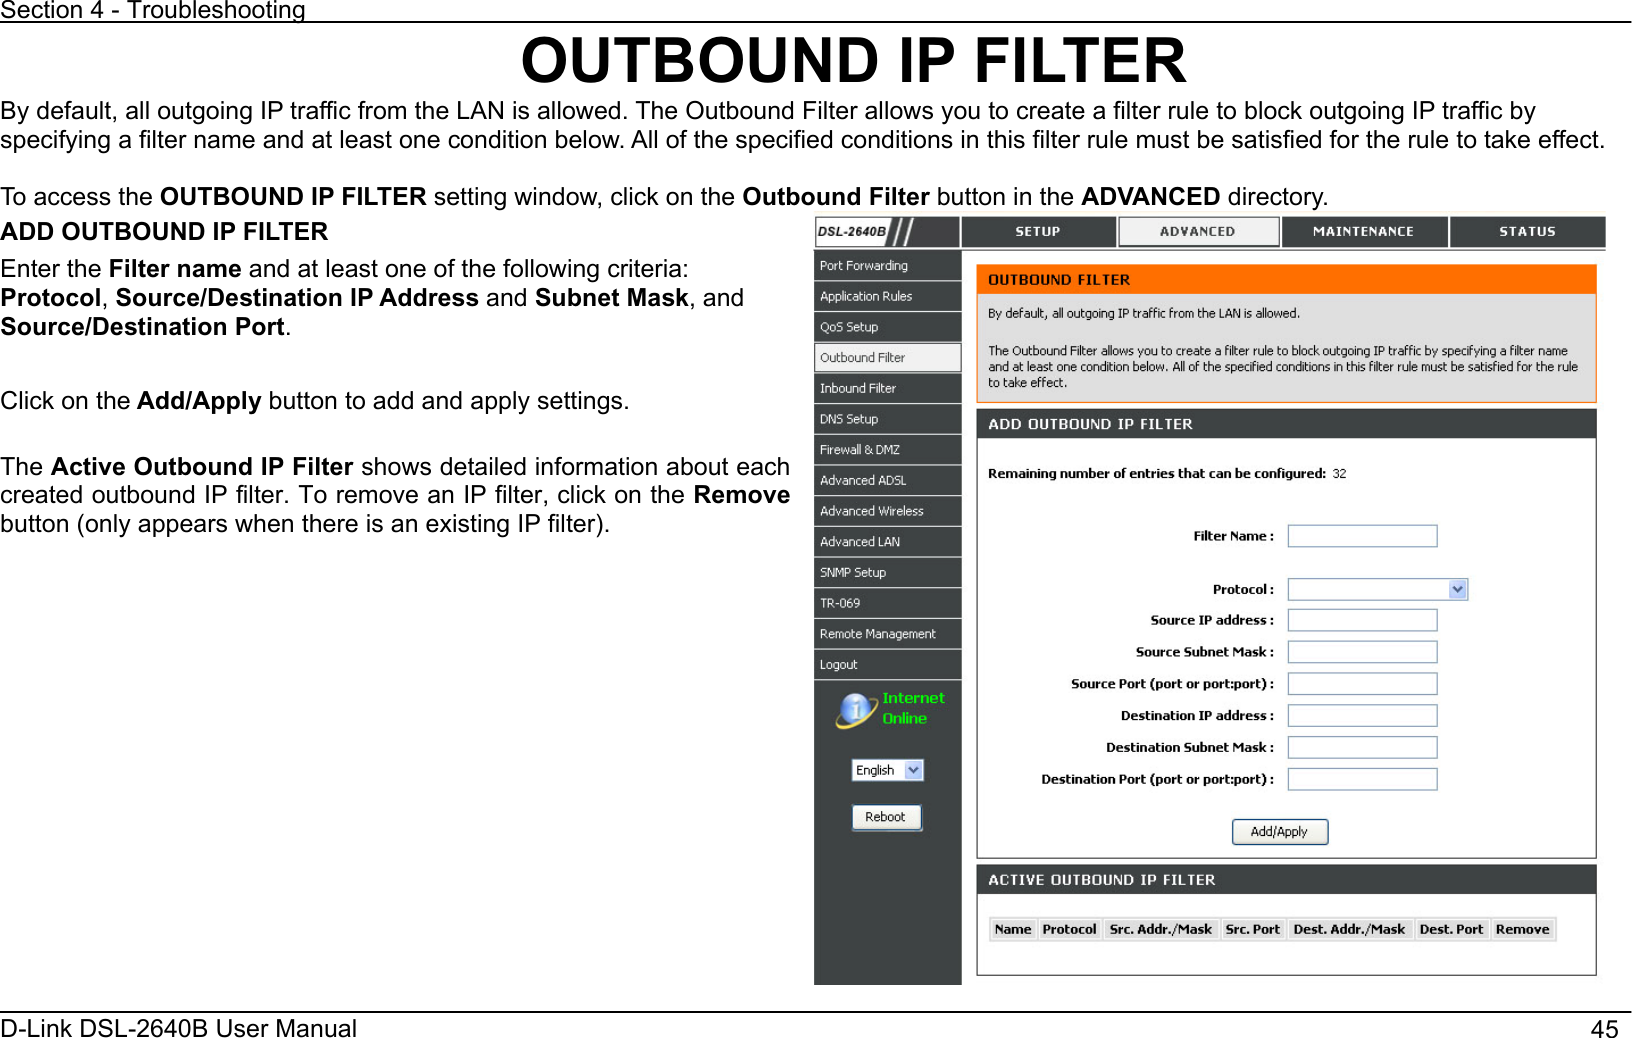 Section 4 - Troubleshooting D-Link DSL-2640B User Manual                                       45OUTBOUND IP FILTER By default, all outgoing IP traffic from the LAN is allowed. The Outbound Filter allows you to create a filter rule to block outgoing IP traffic by specifying a filter name and at least one condition below. All of the specified conditions in this filter rule must be satisfied for the rule to take effect. To access the OUTBOUND IP FILTER setting window, click on the Outbound Filter button in the ADVANCED directory. ADD OUTBOUND IP FILTER Enter the Filter name and at least one of the following criteria: Protocol,Source/Destination IP Address and Subnet Mask, and Source/Destination Port.Click on the Add/Apply button to add and apply settings.   The Active Outbound IP Filter shows detailed information about each created outbound IP filter. To remove an IP filter, click on the Remove button (only appears when there is an existing IP filter). 